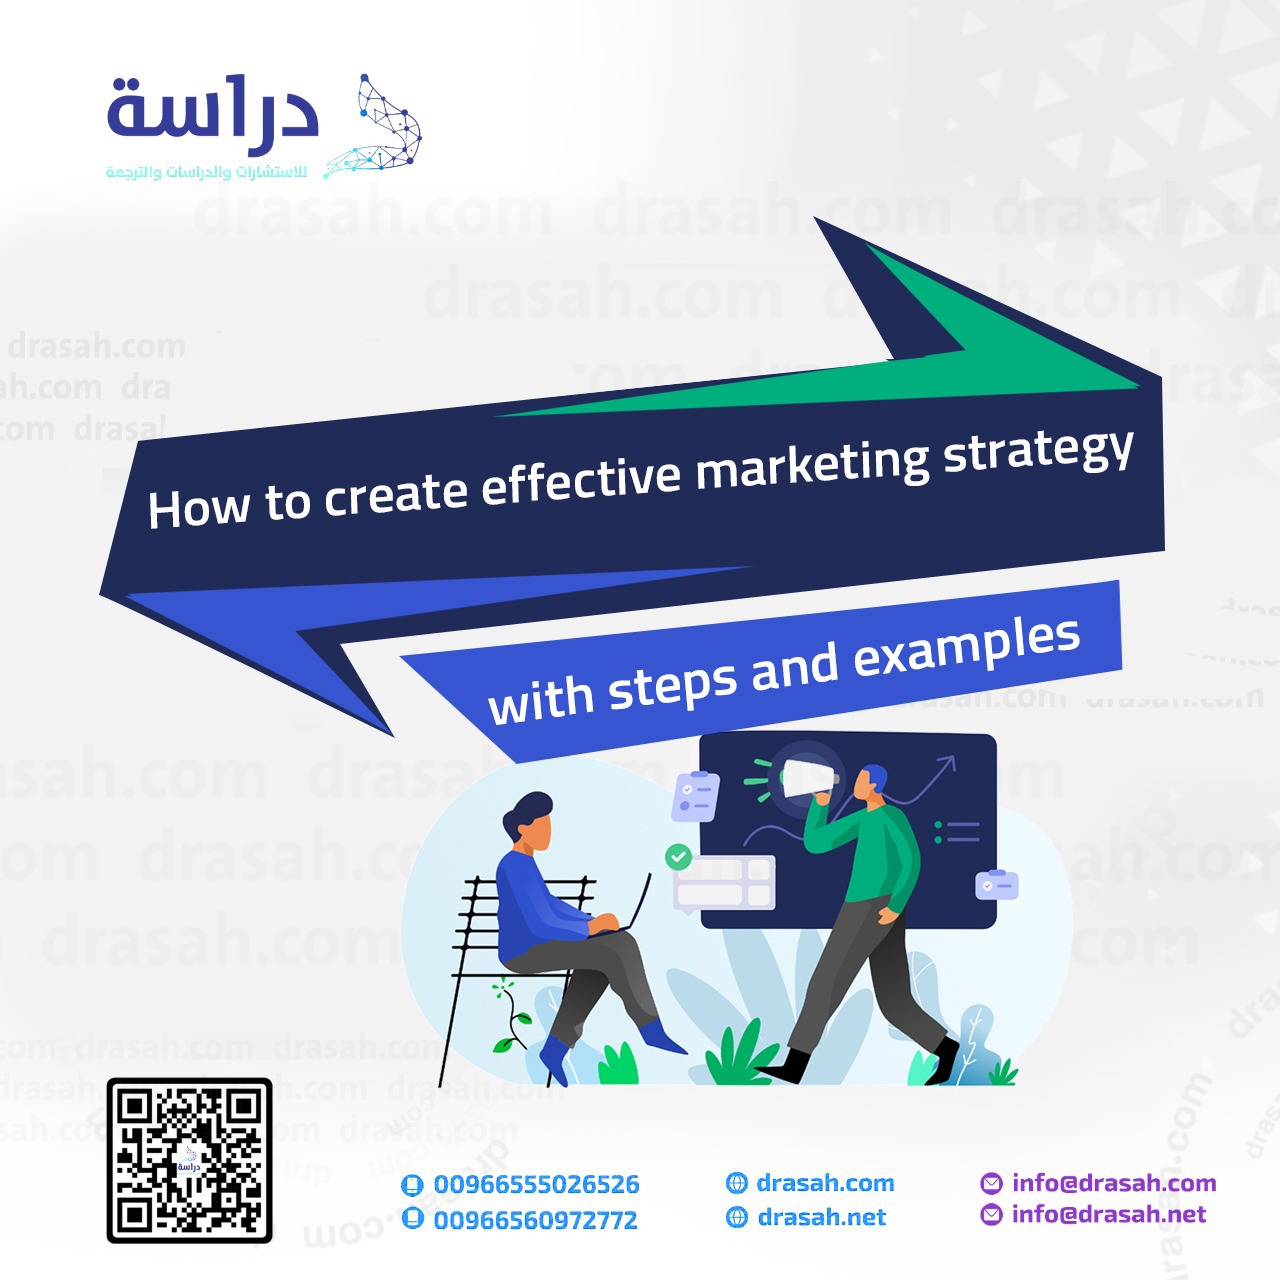 How to create effective marketing strategy with steps and examples